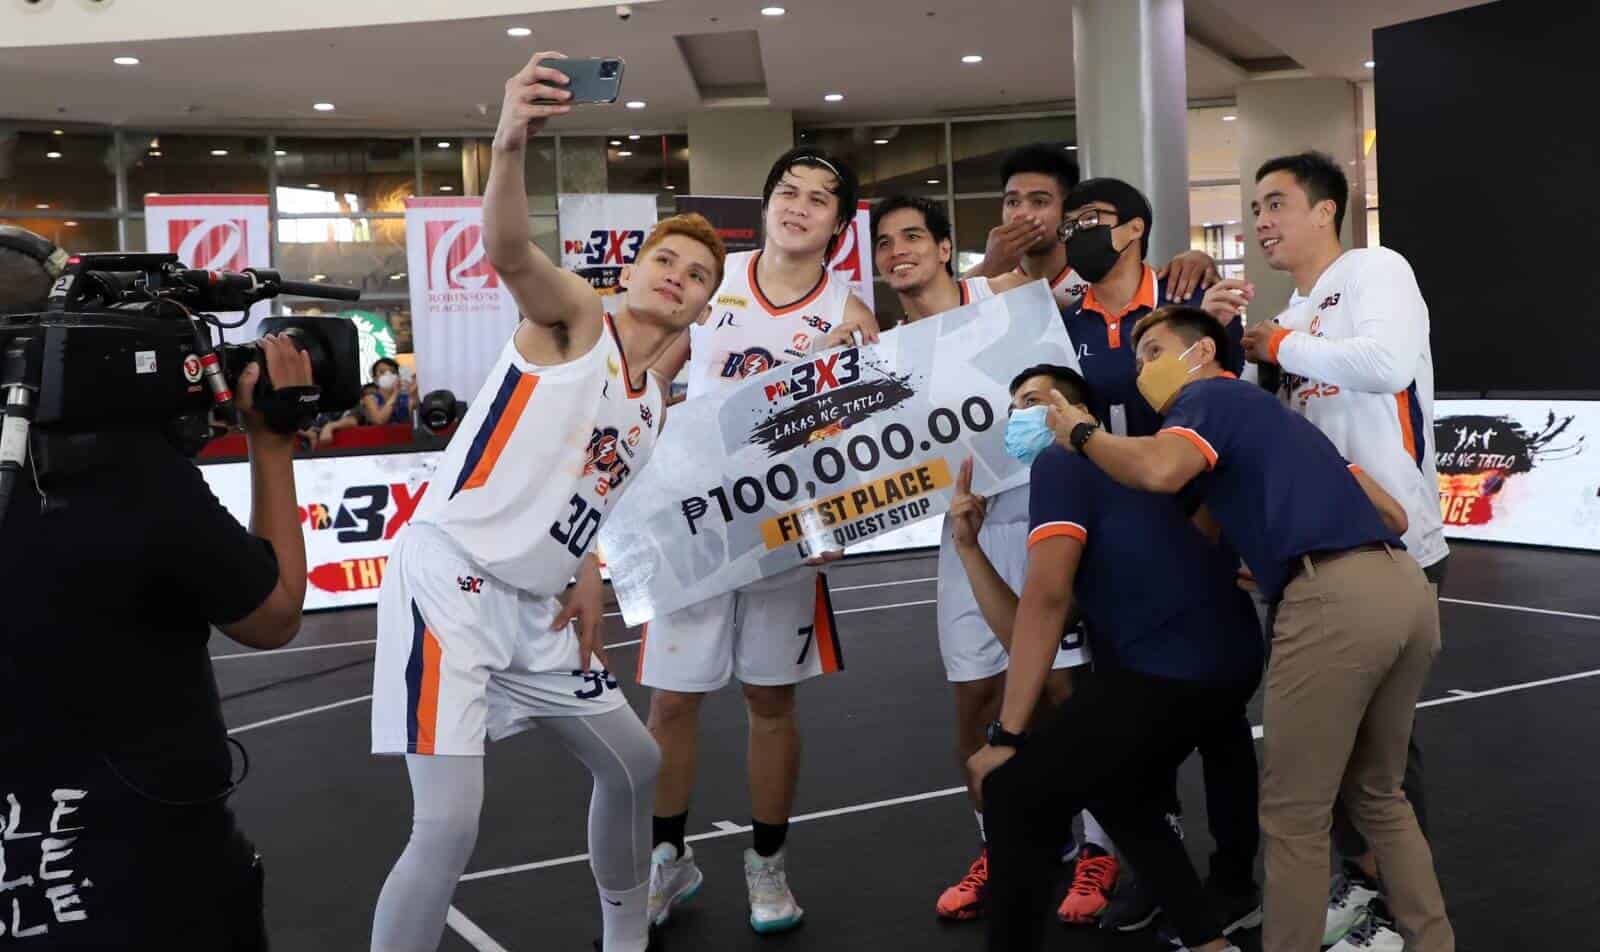 A group of basketball players celebrating their victory in the PBA 3x3 Third Conference.